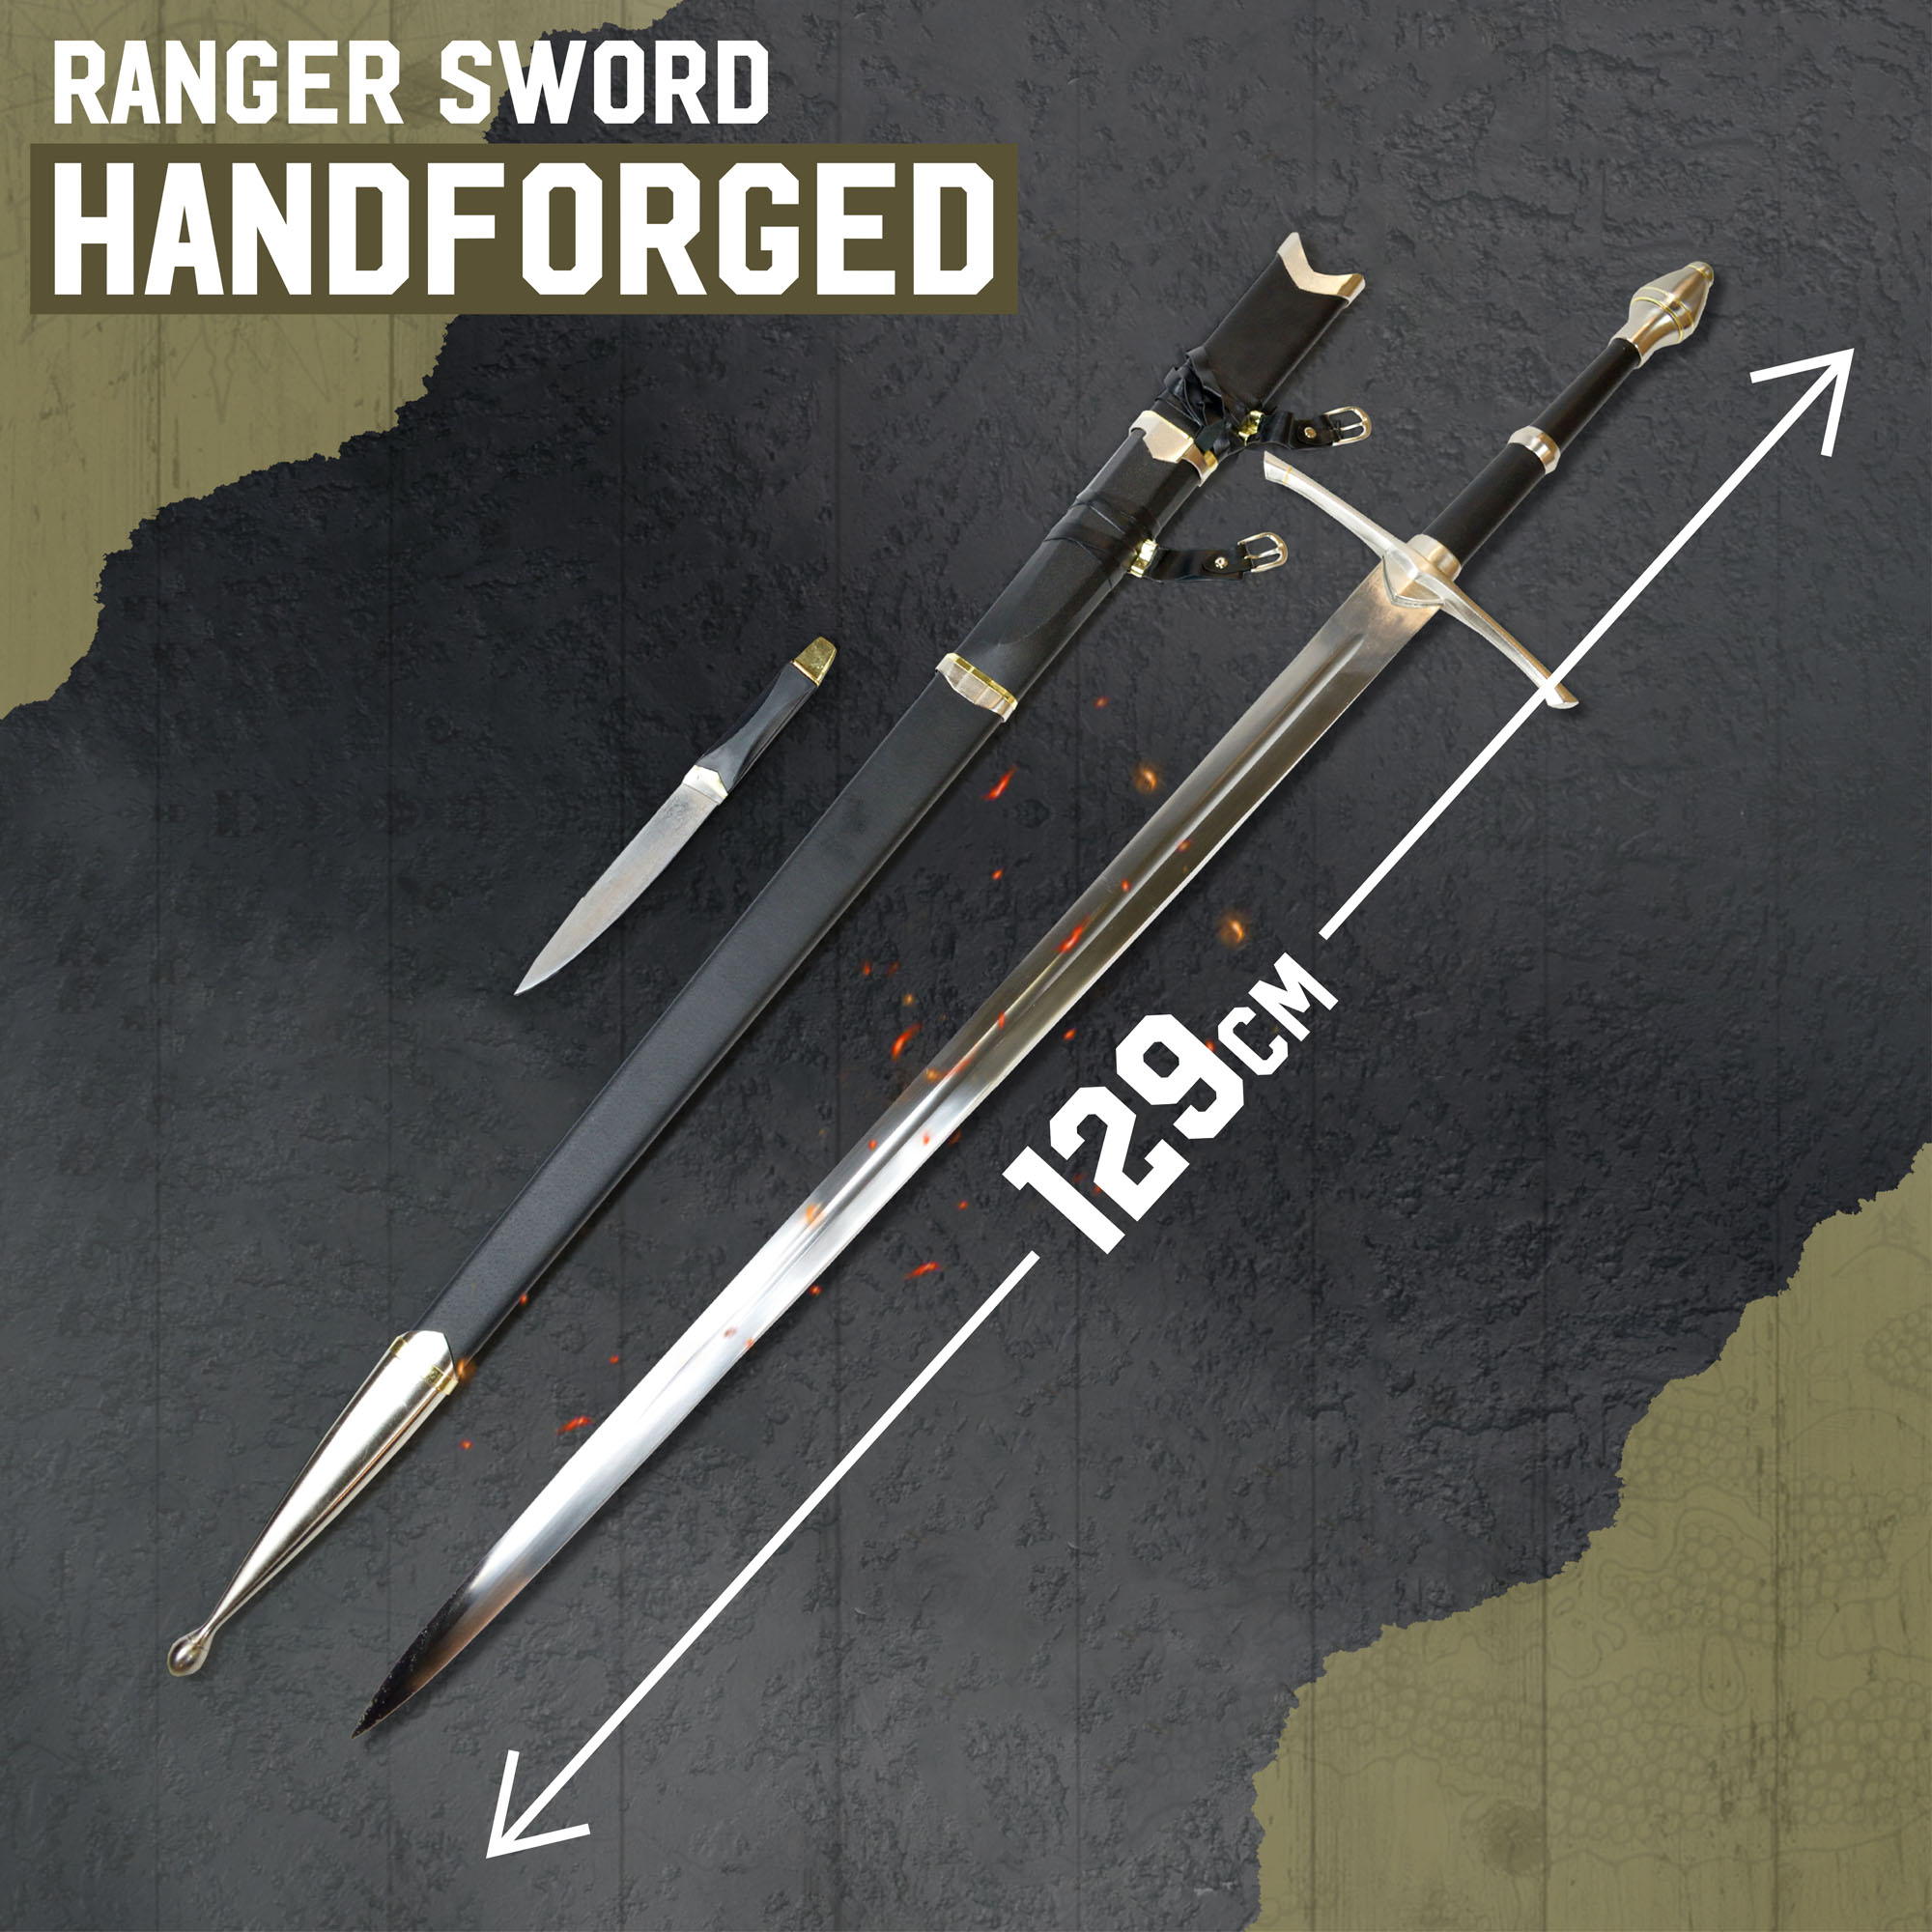 Ranger sword, handforged, with knife and sharp blade